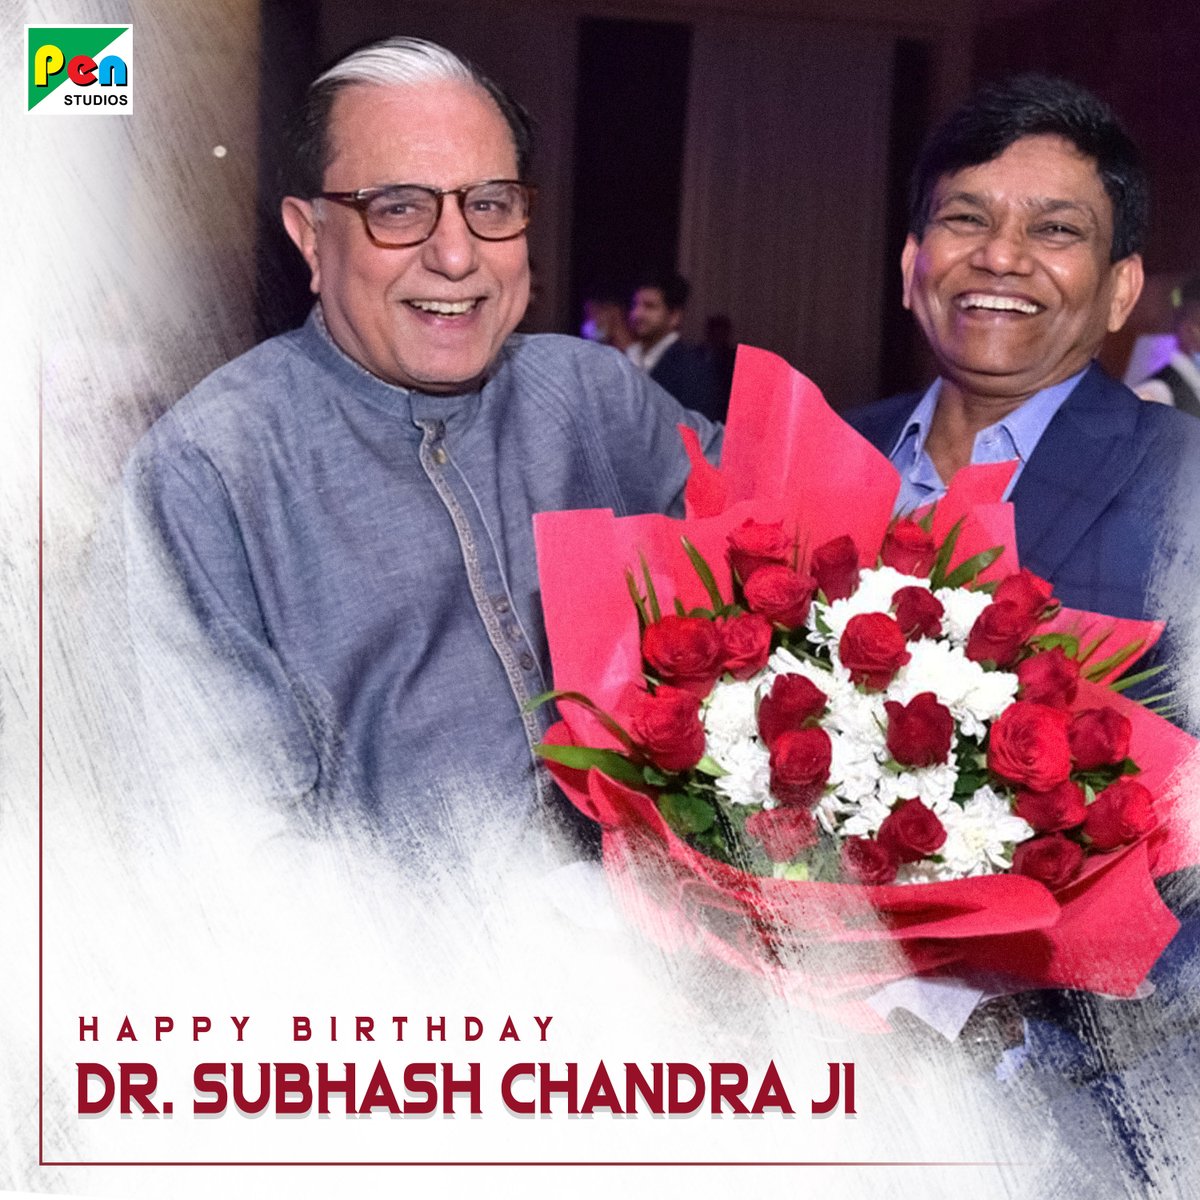 I wish the media tycoon and my mentor @subhashchandra ji, a very happy birthday! May this year bring you immense happiness and success.